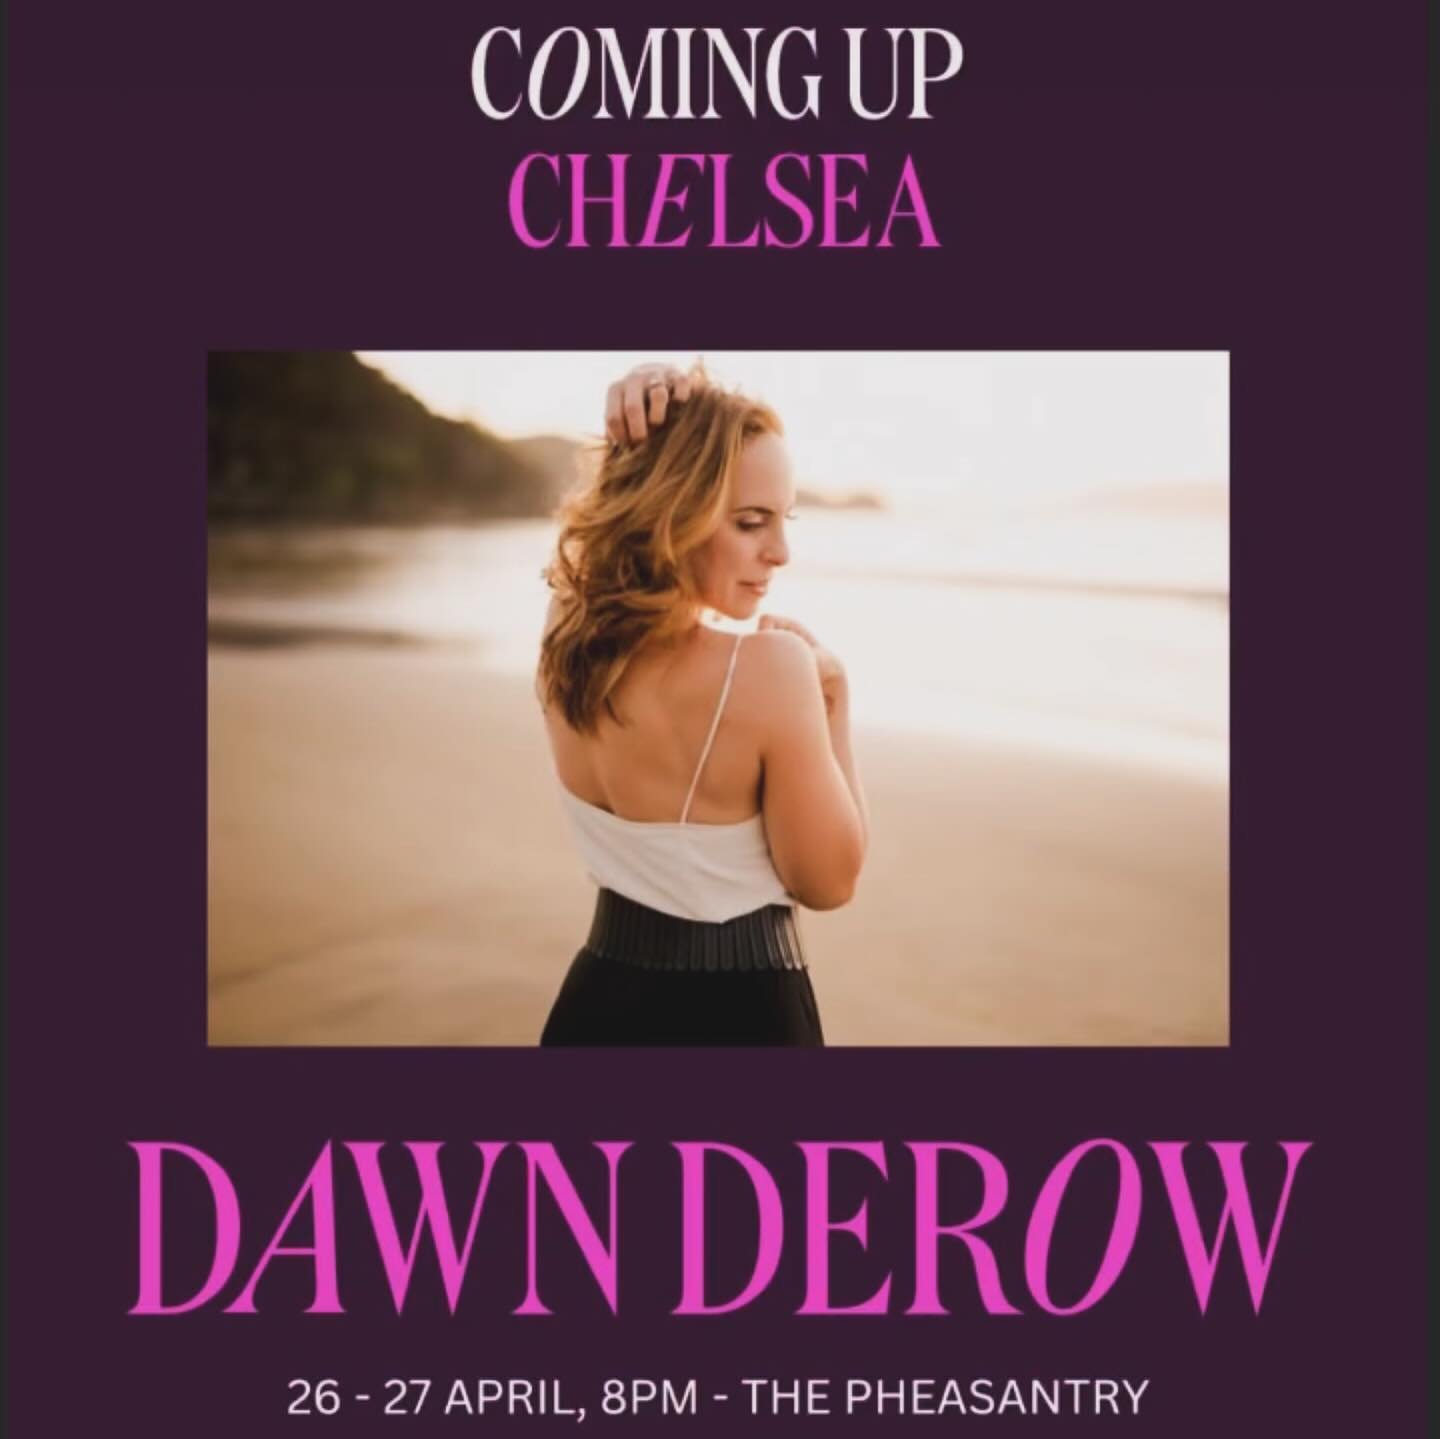 HEY LONDON!! I&rsquo;m here&hellip; and I hope you&rsquo;ll come out and see my brand new show @pizzaexpresslive 
The Pheasantry!!! 

Women&rsquo;s Work
With @dawnderow / @dawnderowfit 

Celebrating some Female Artists who have shattered glass ceilin